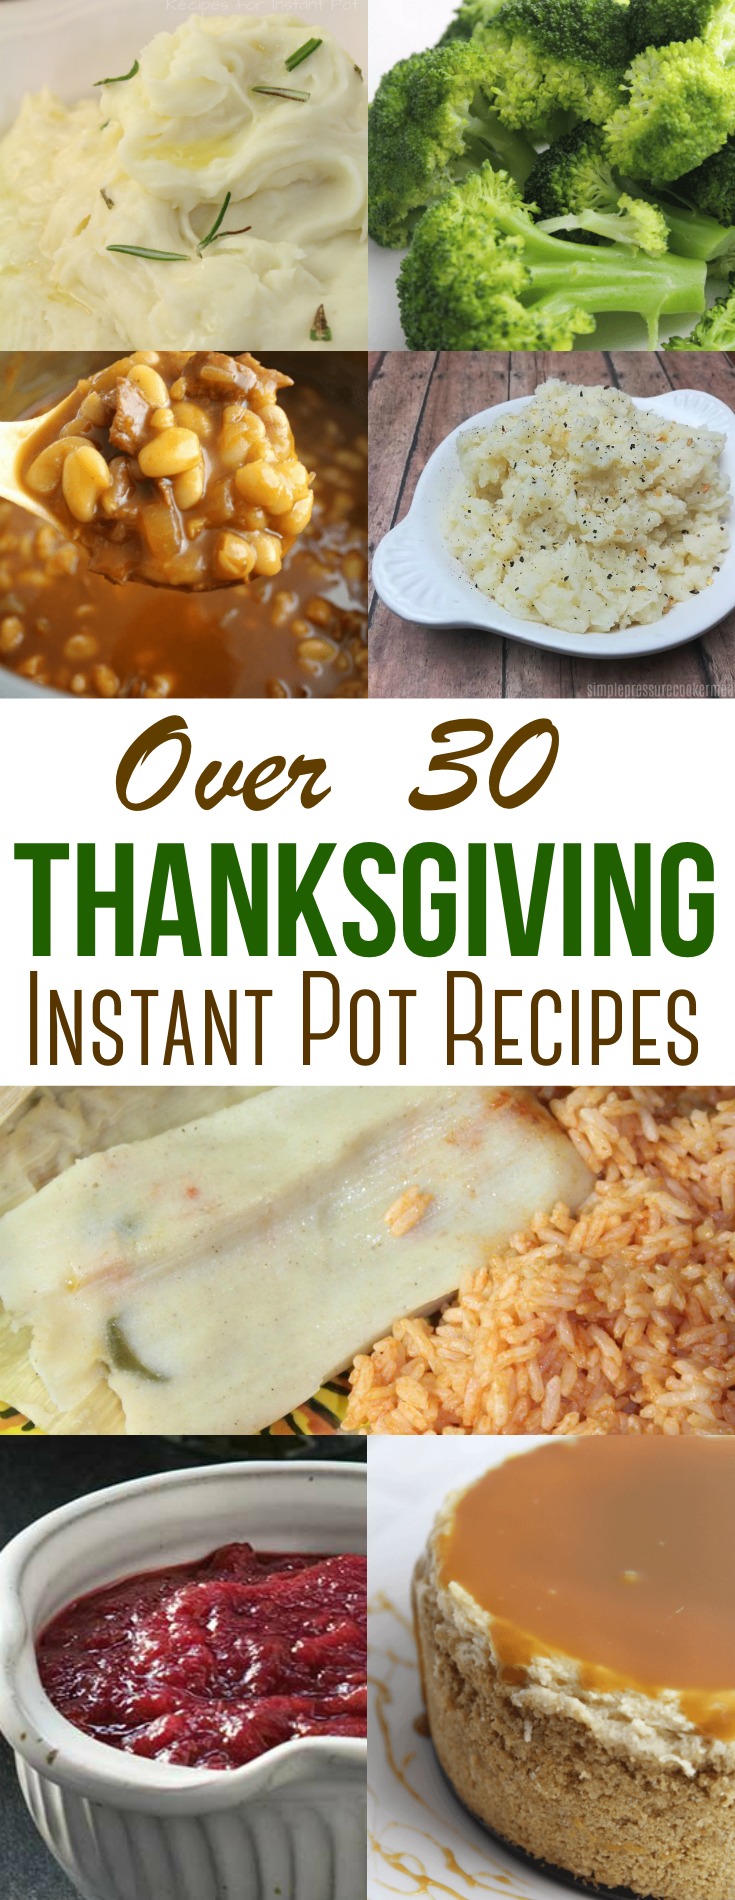 Over 30 wonderful Thanksgiving Instant Pot Recipes to help you make this one of the best and easiest Thanksgiving holidays yet!